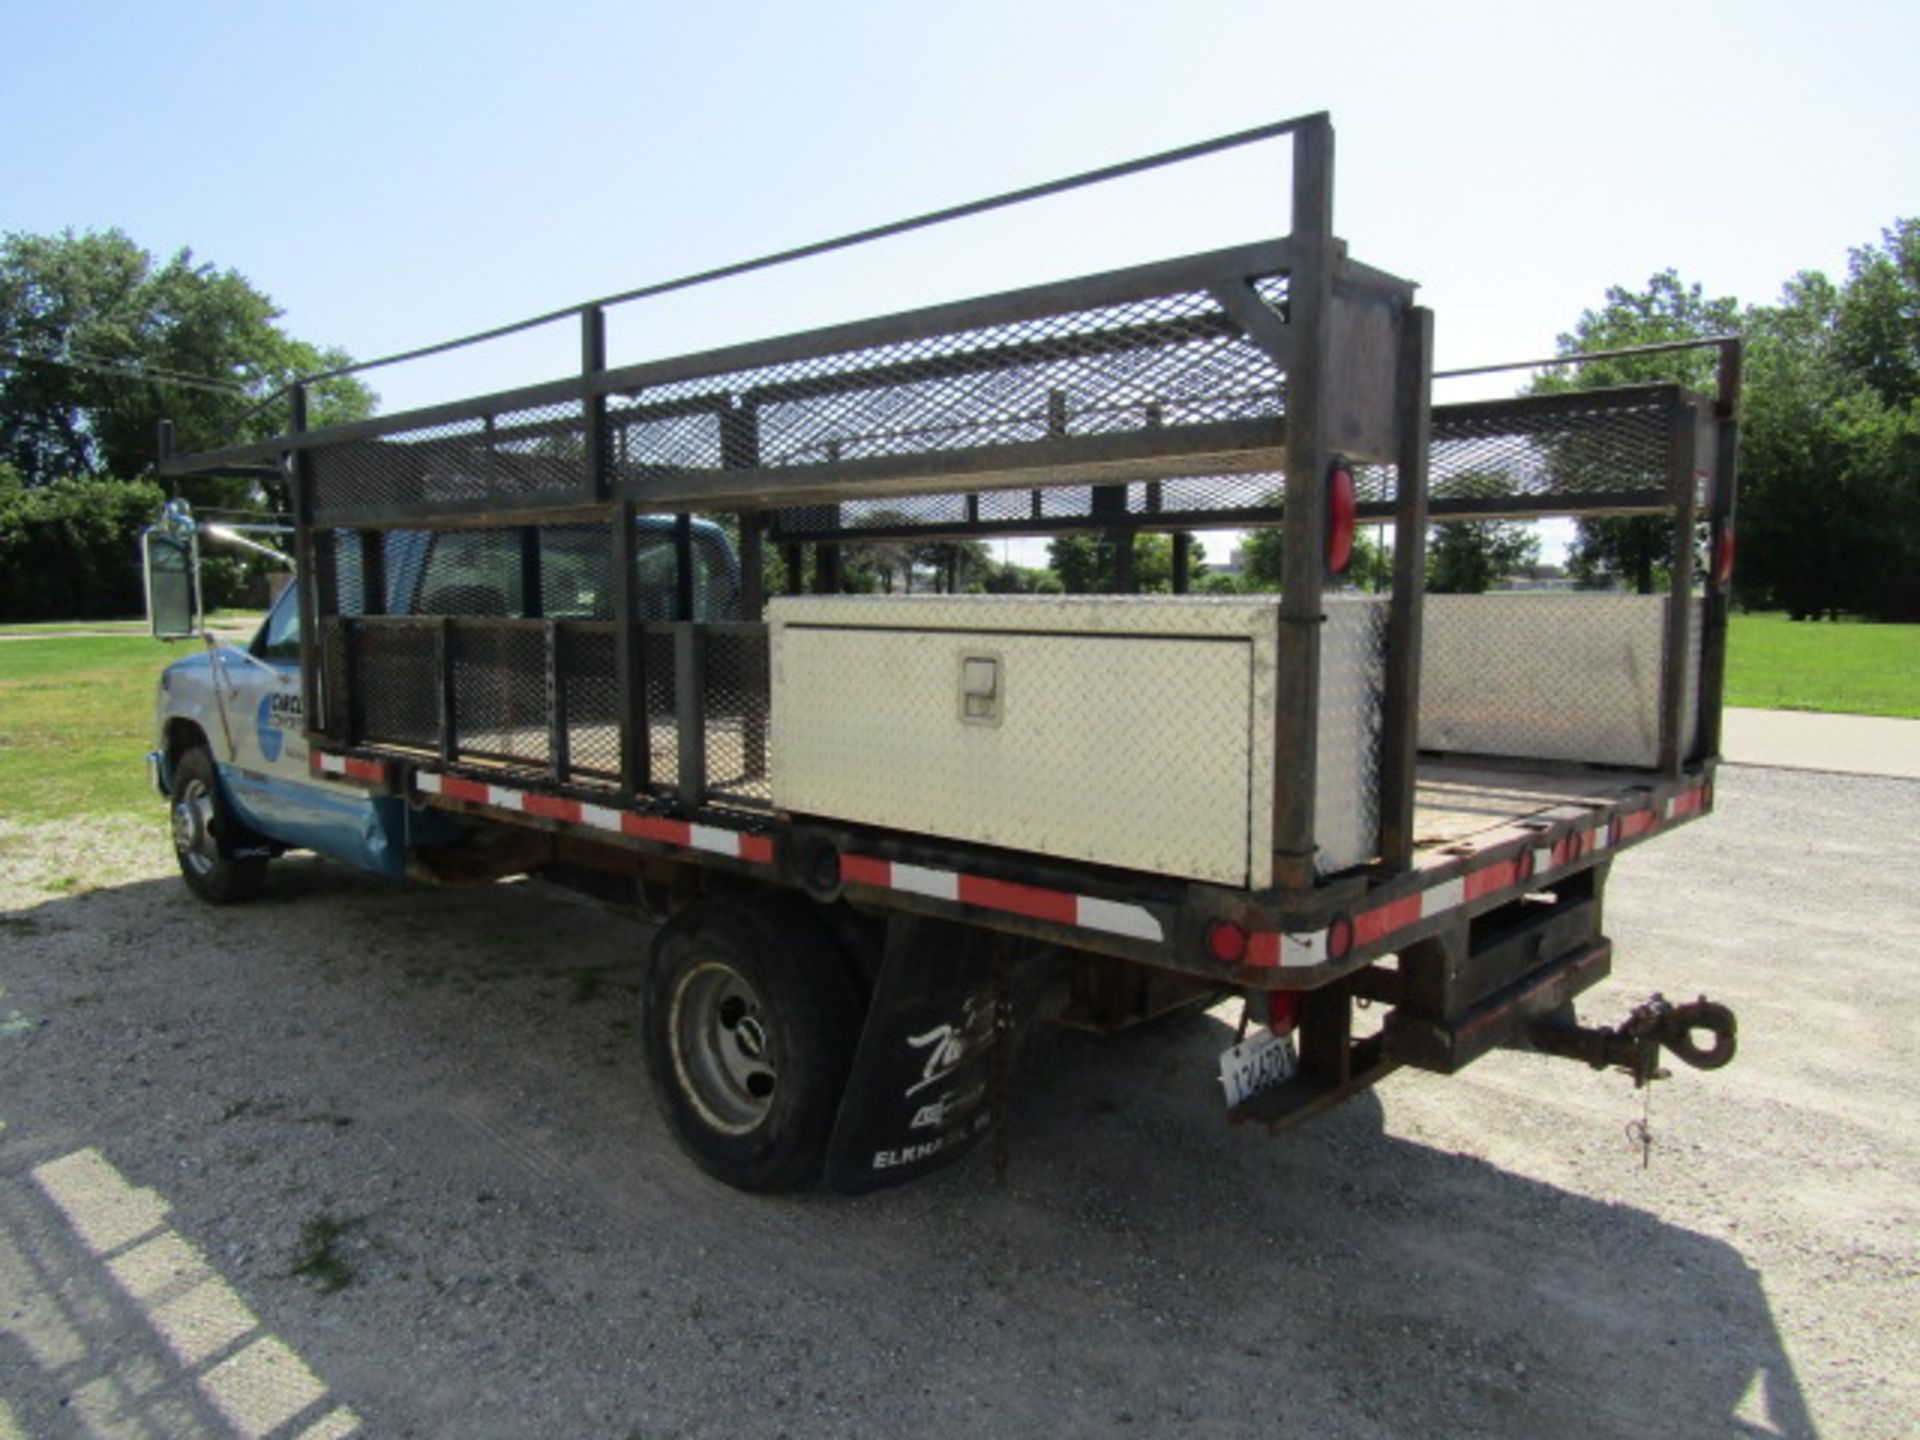 1999 Chevy 3500 Form Pick Up w/Tool Boxes, 9' Bed, Model GMT-400, Dually, VIN #1GBJC34J0XF063255, - Image 5 of 27